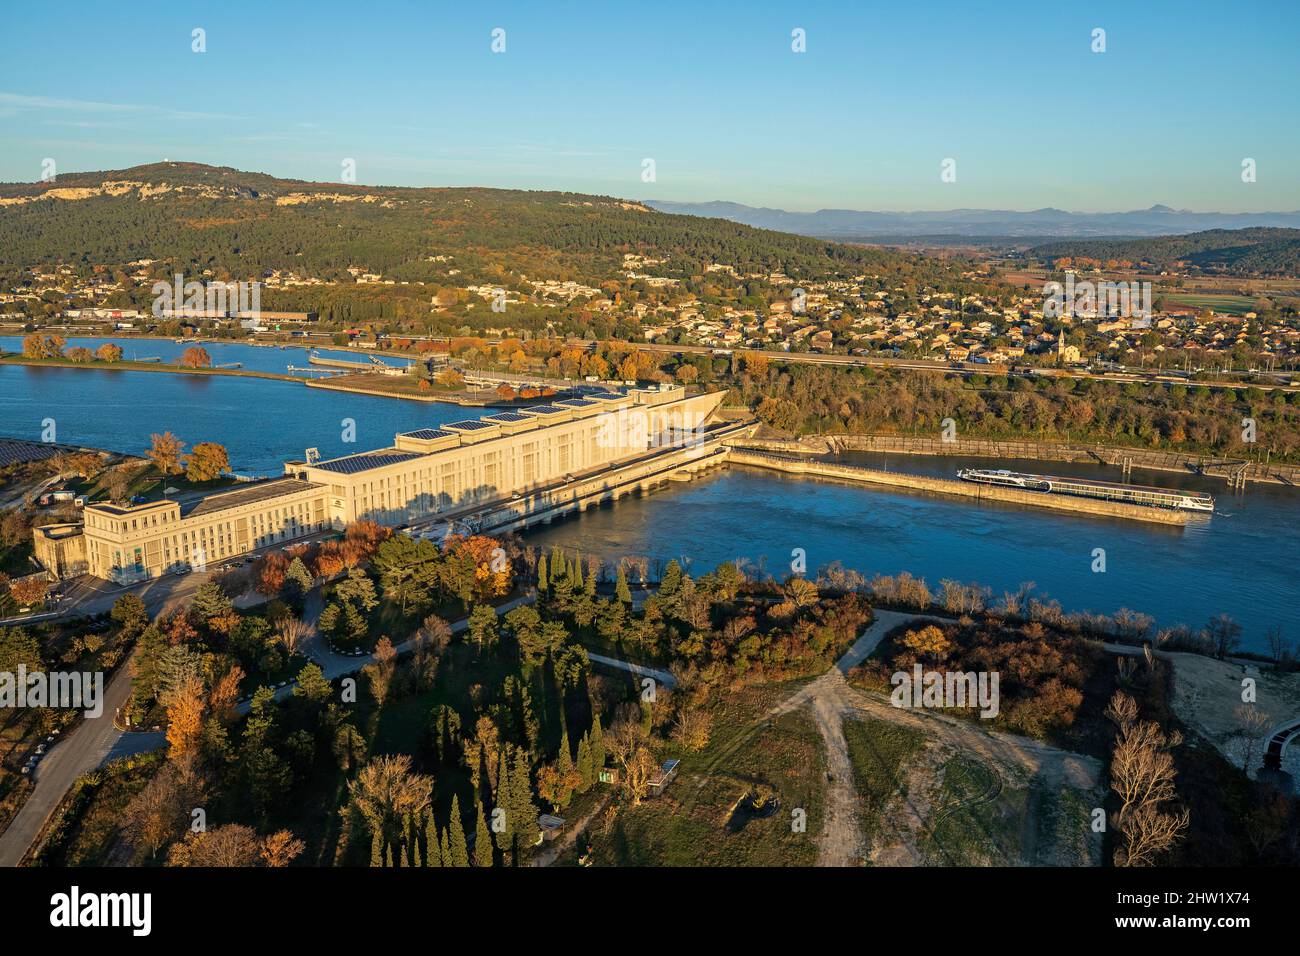 France, Vaucluse, Bollene, Centrale ecluse on the Canal Donzere Mondragon, Le Rhone river (aerial view) Stock Photo